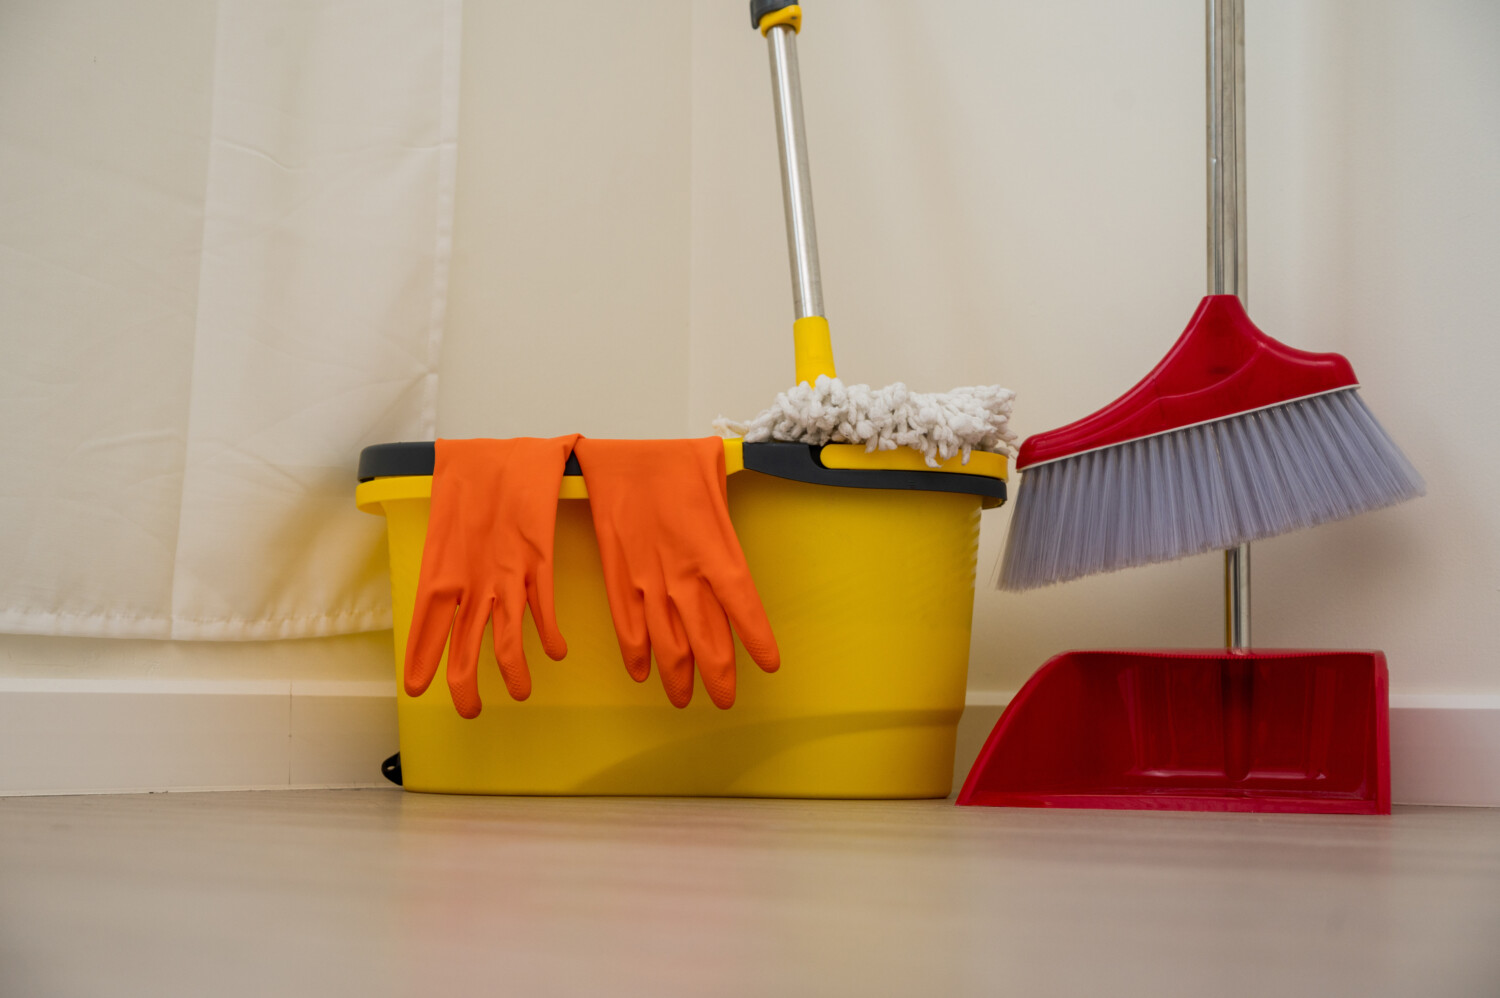 Cleaning supplies, including mop, gloves, bucket and broom